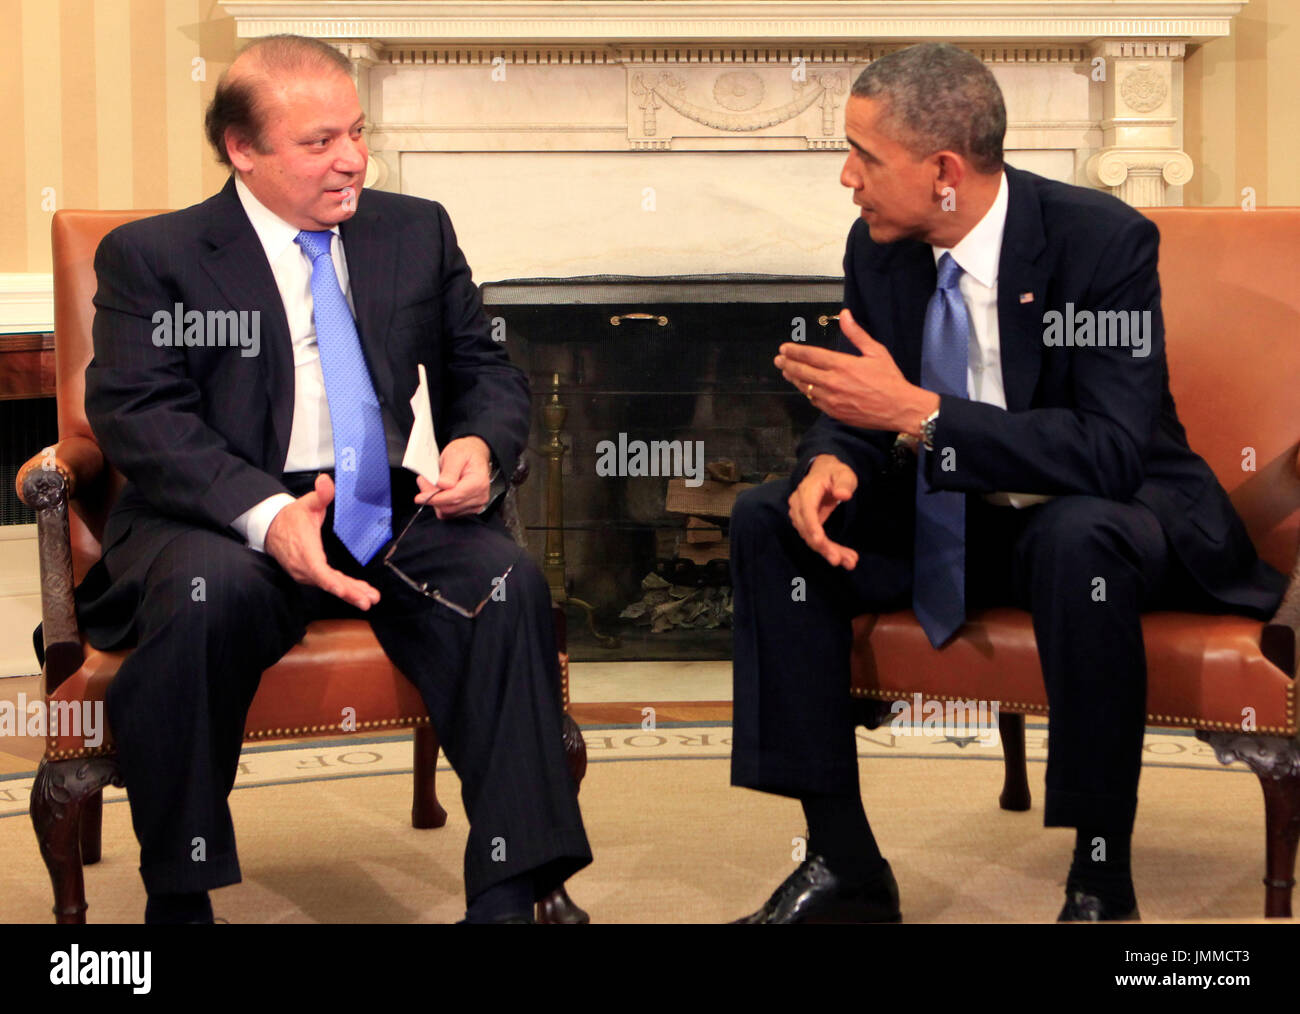 United States President Barack Obama meets with Prime Minister Nawaz Sharif of Pakistan in the Oval Office of the White House in Washington, D.C. on October 23, 2013. Credit: Dennis Brack / Pool via CNP / MediaPunch Stock Photo